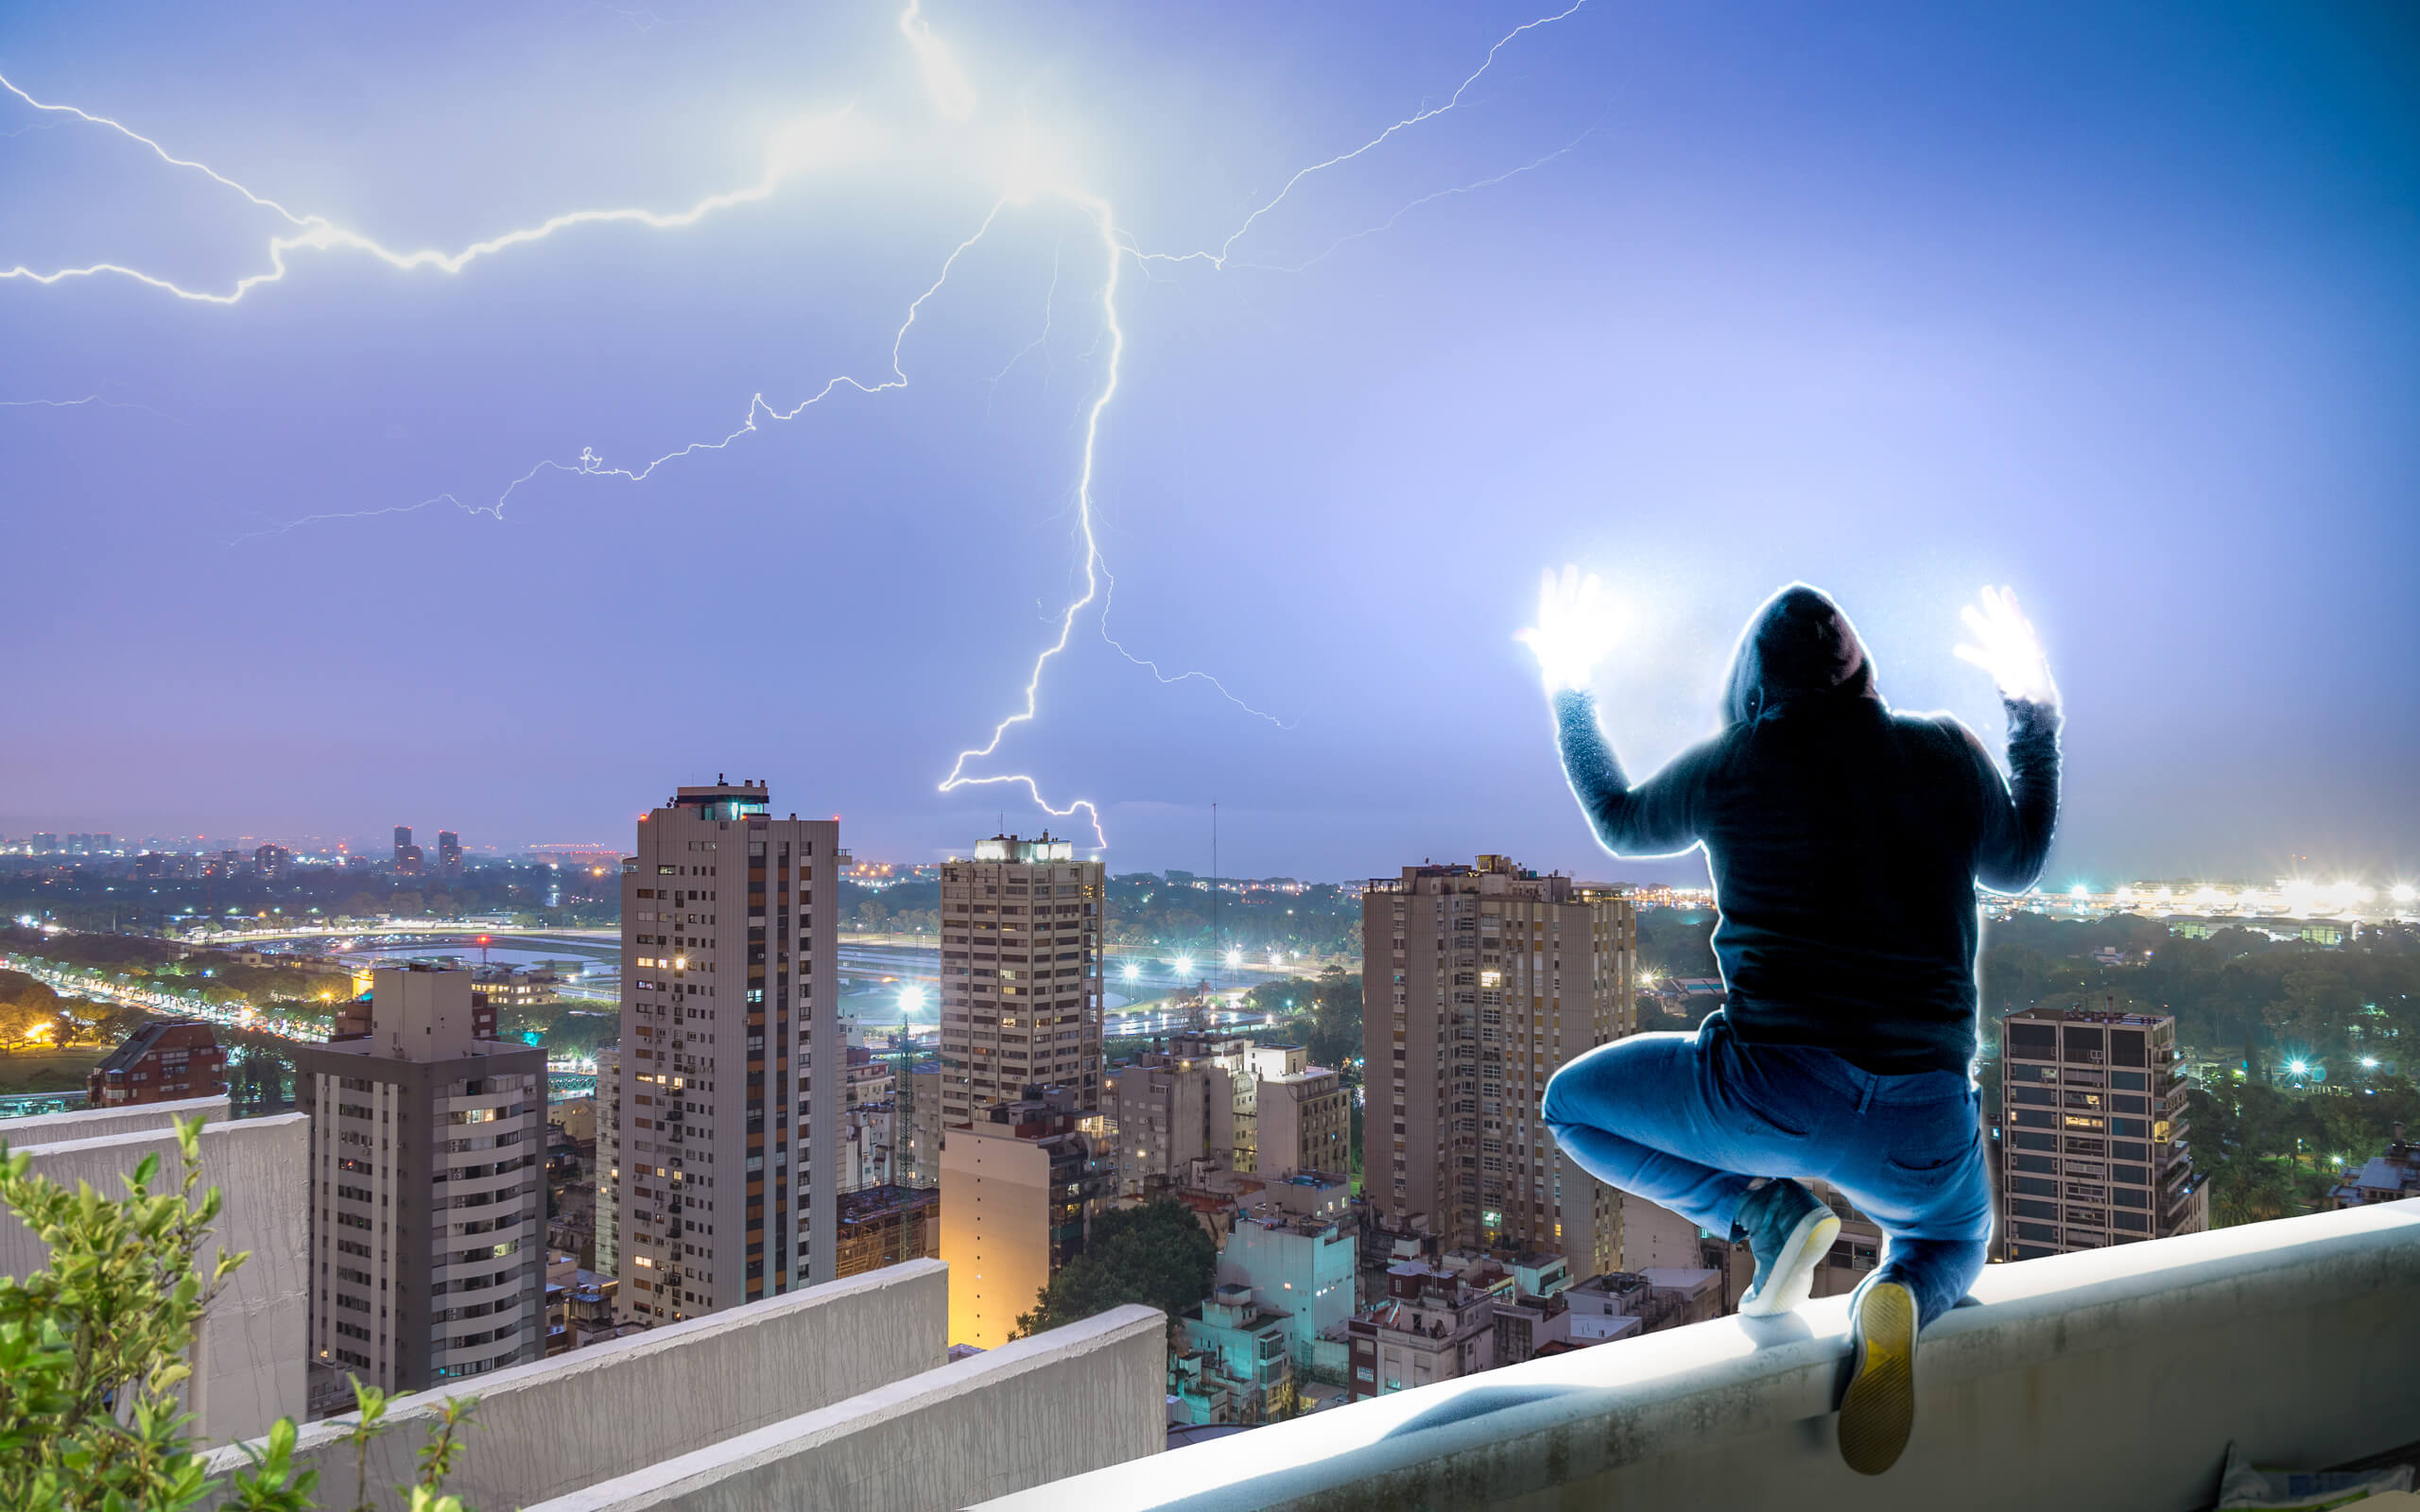 Surreal Photos. LIFELIGHTLENS image of person controlling lightning with their hands